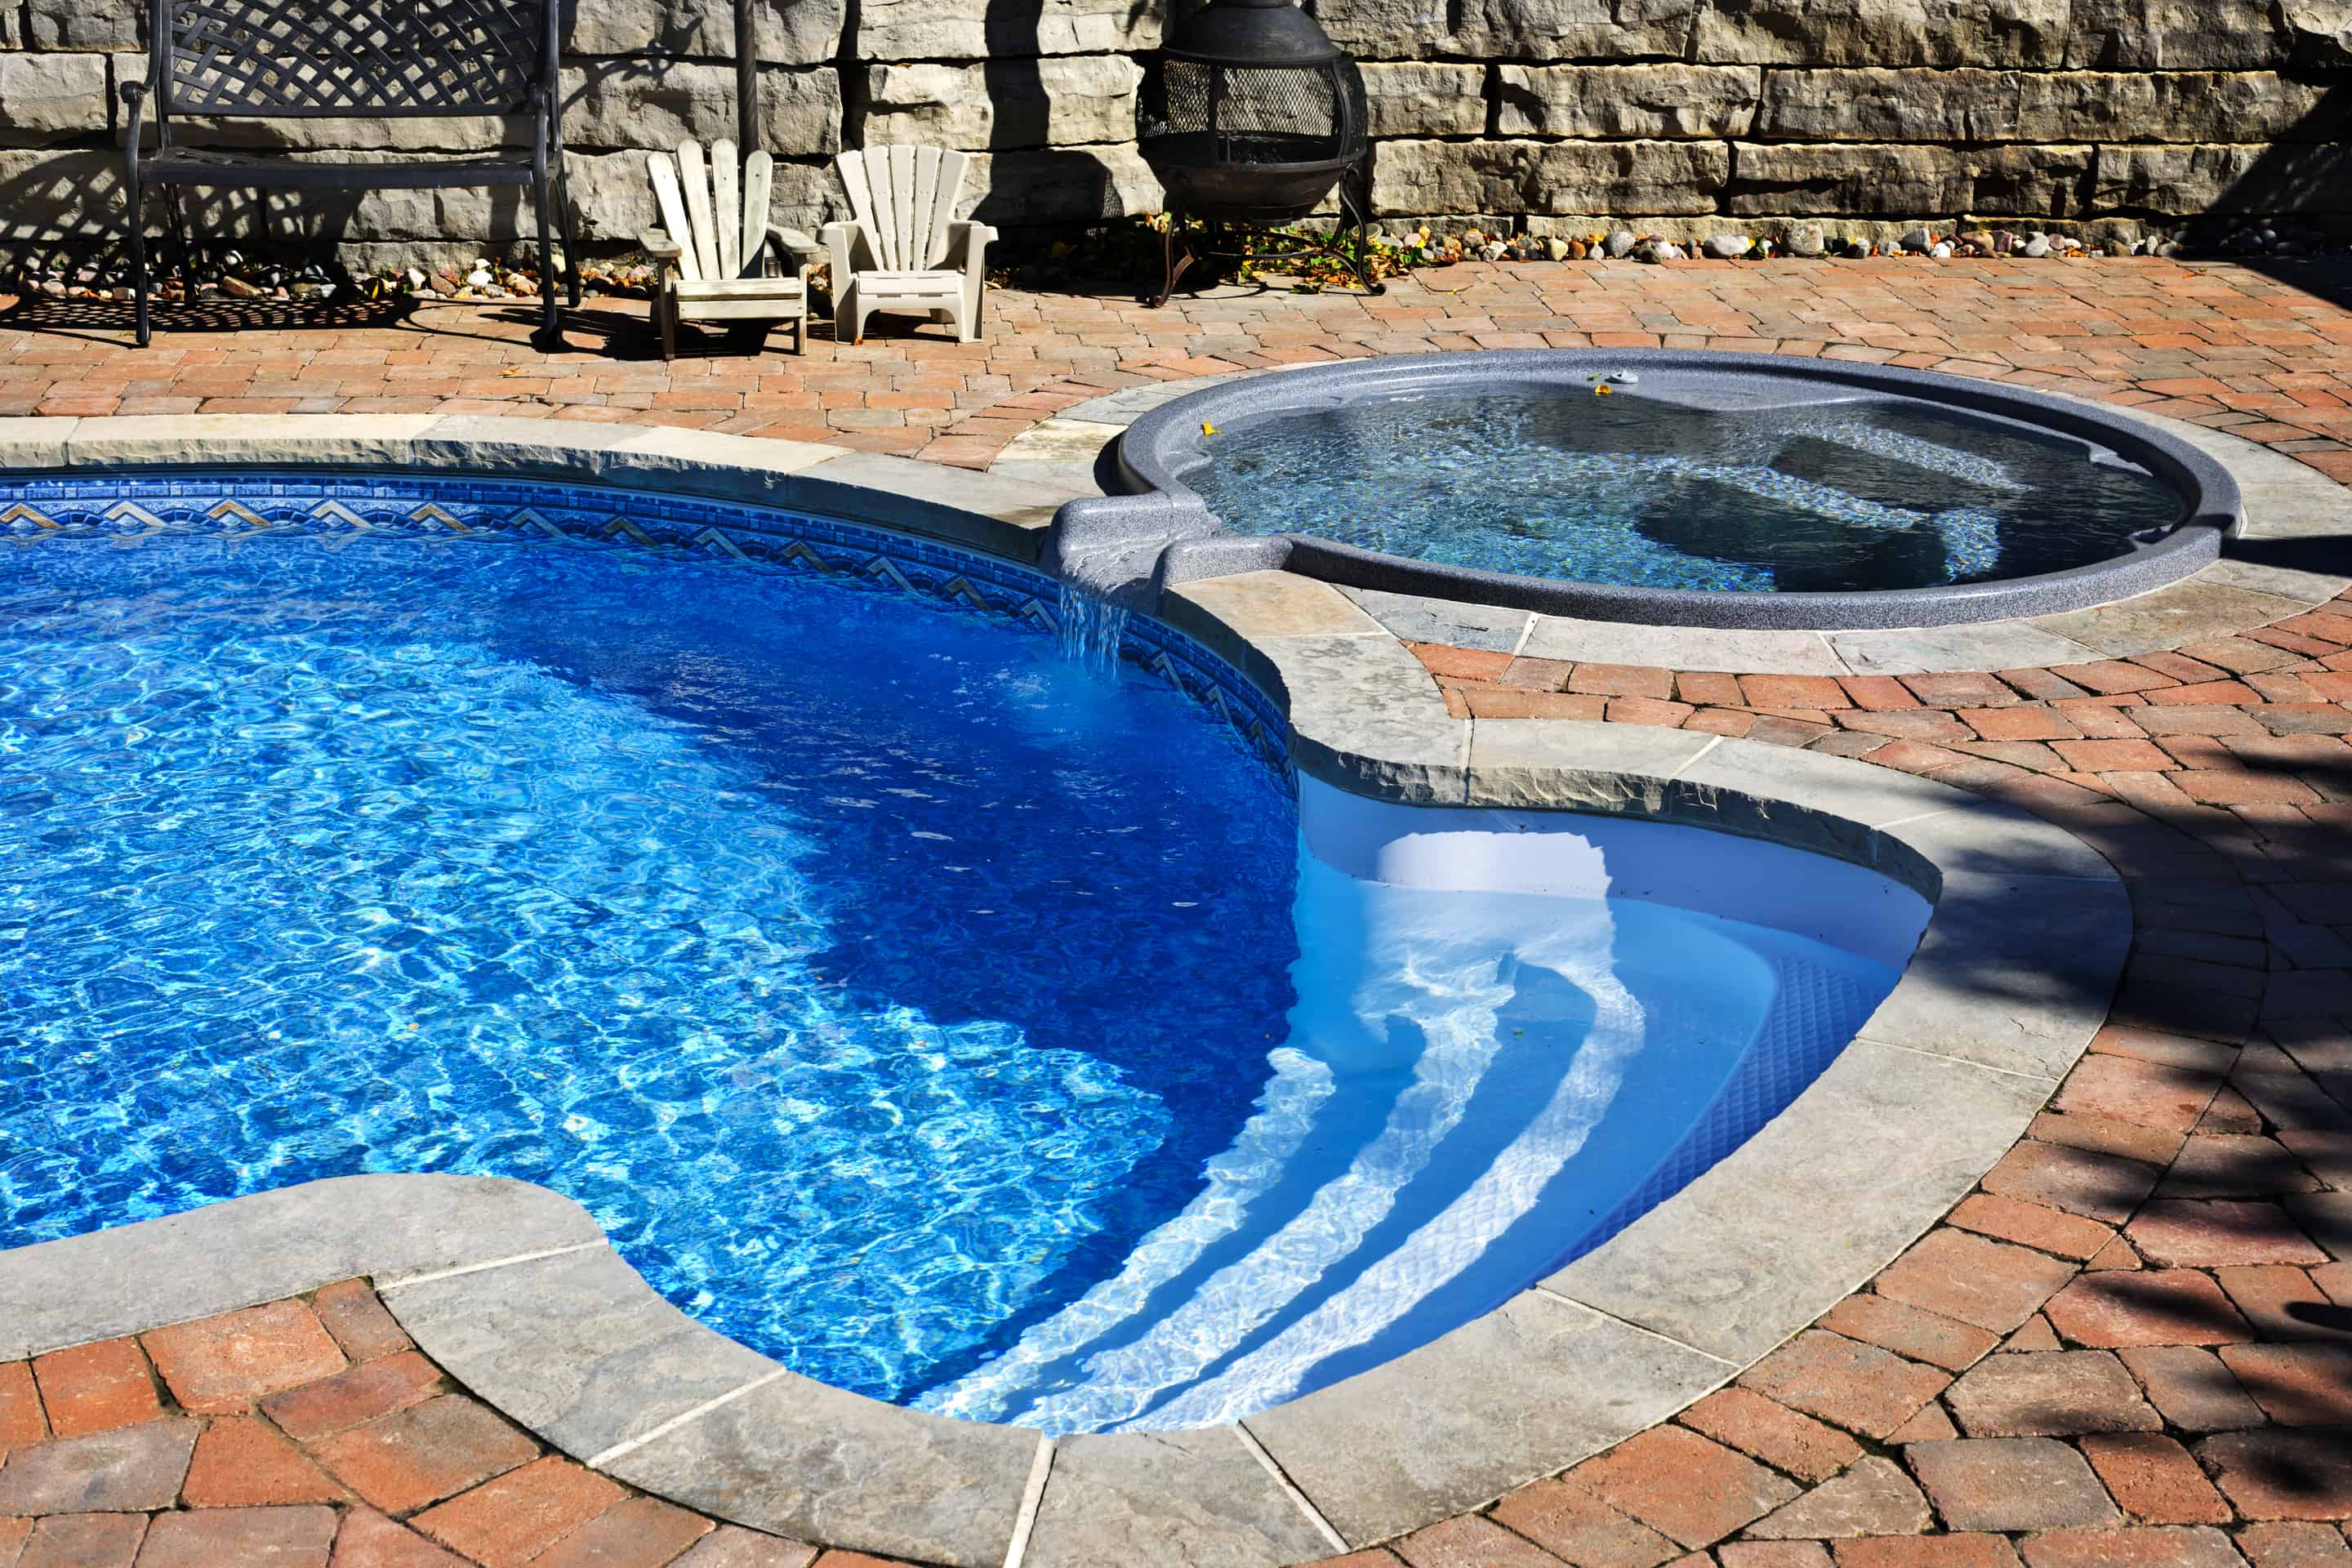 Pool Patio Stone Coping Sealing, Do You Need To Seal Pool Tile Grout